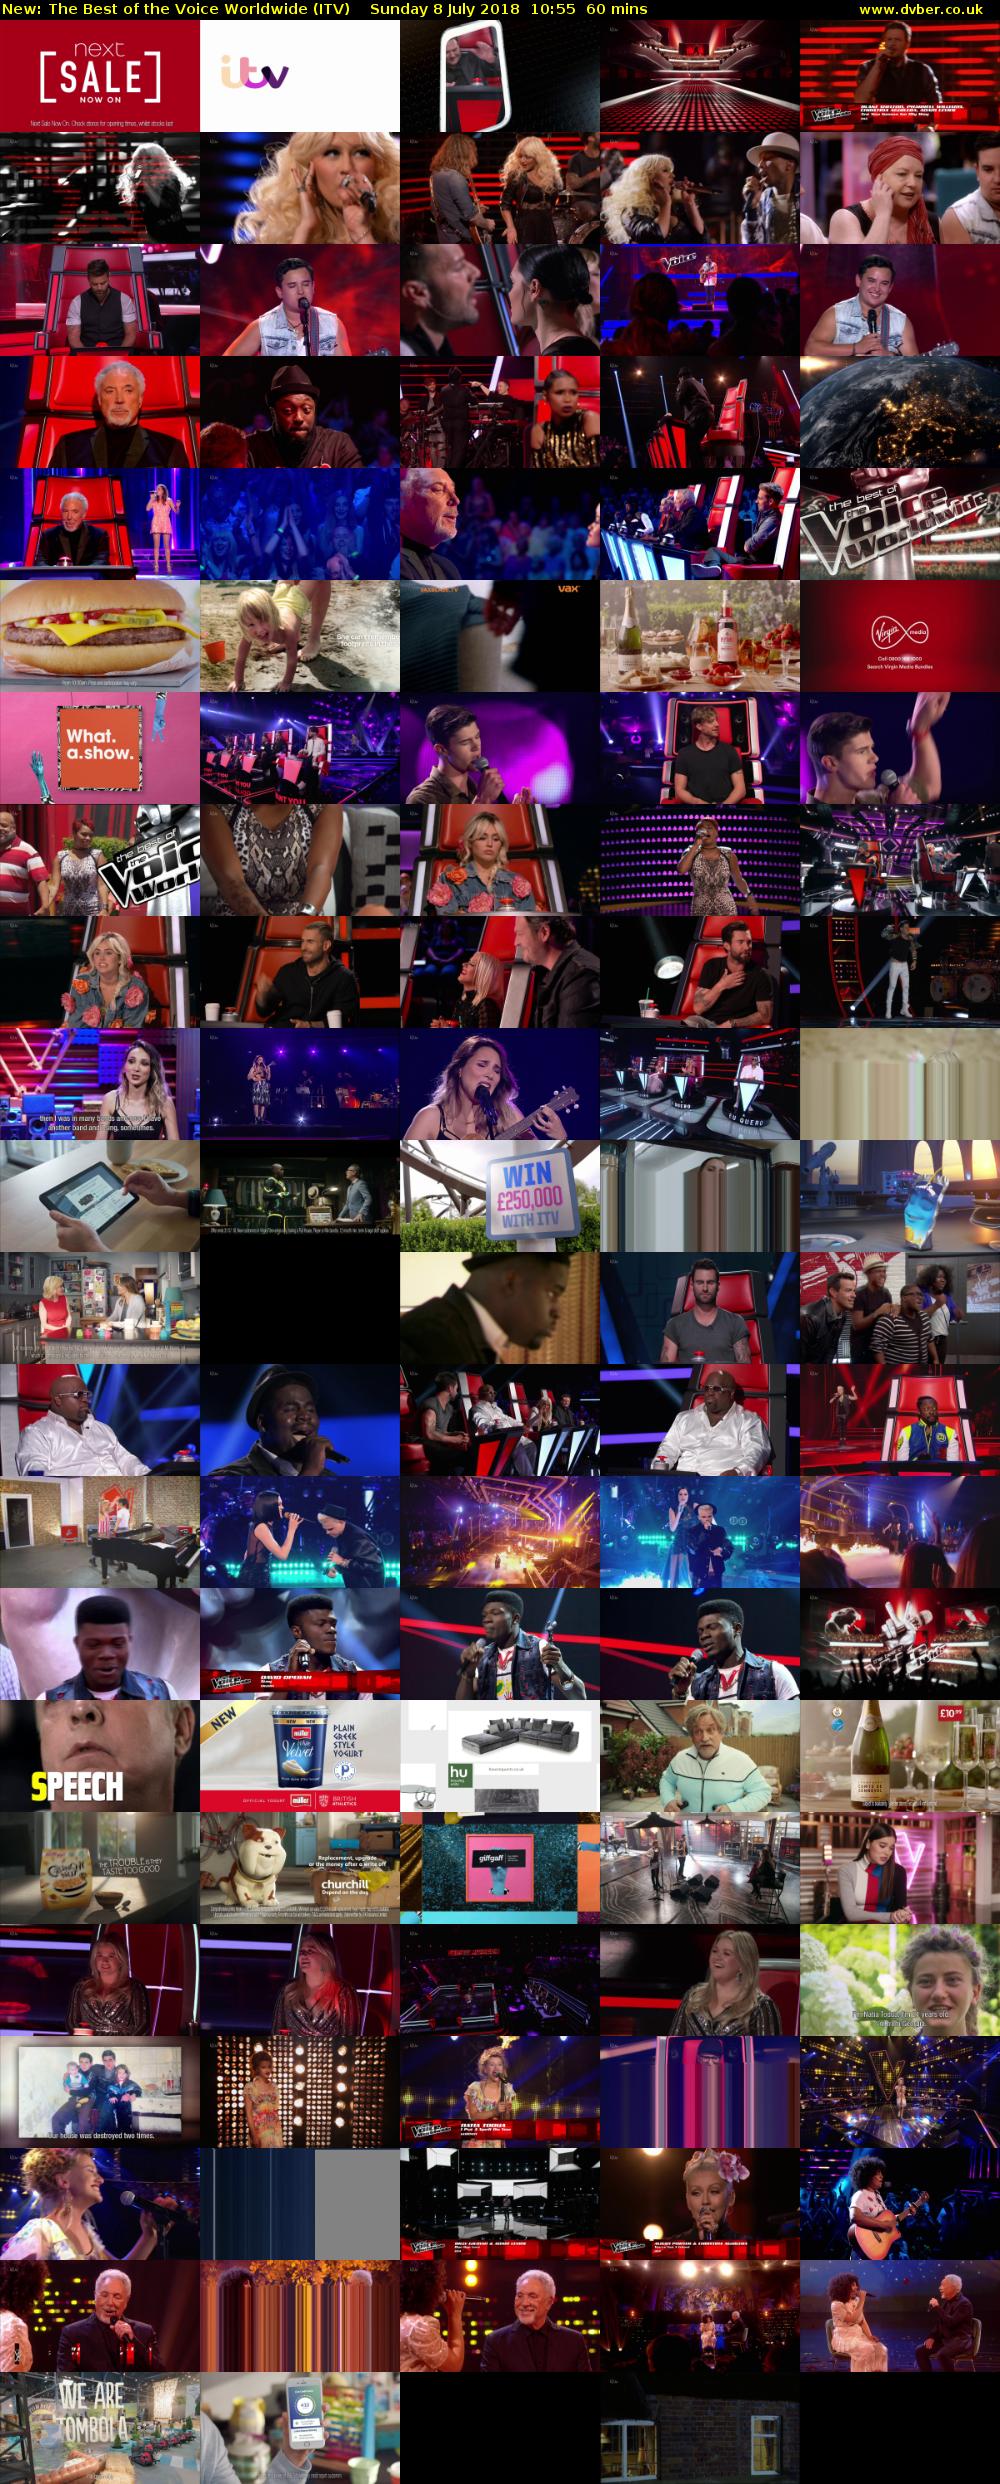 The Best of the Voice Worldwide (ITV) Sunday 8 July 2018 10:55 - 11:55